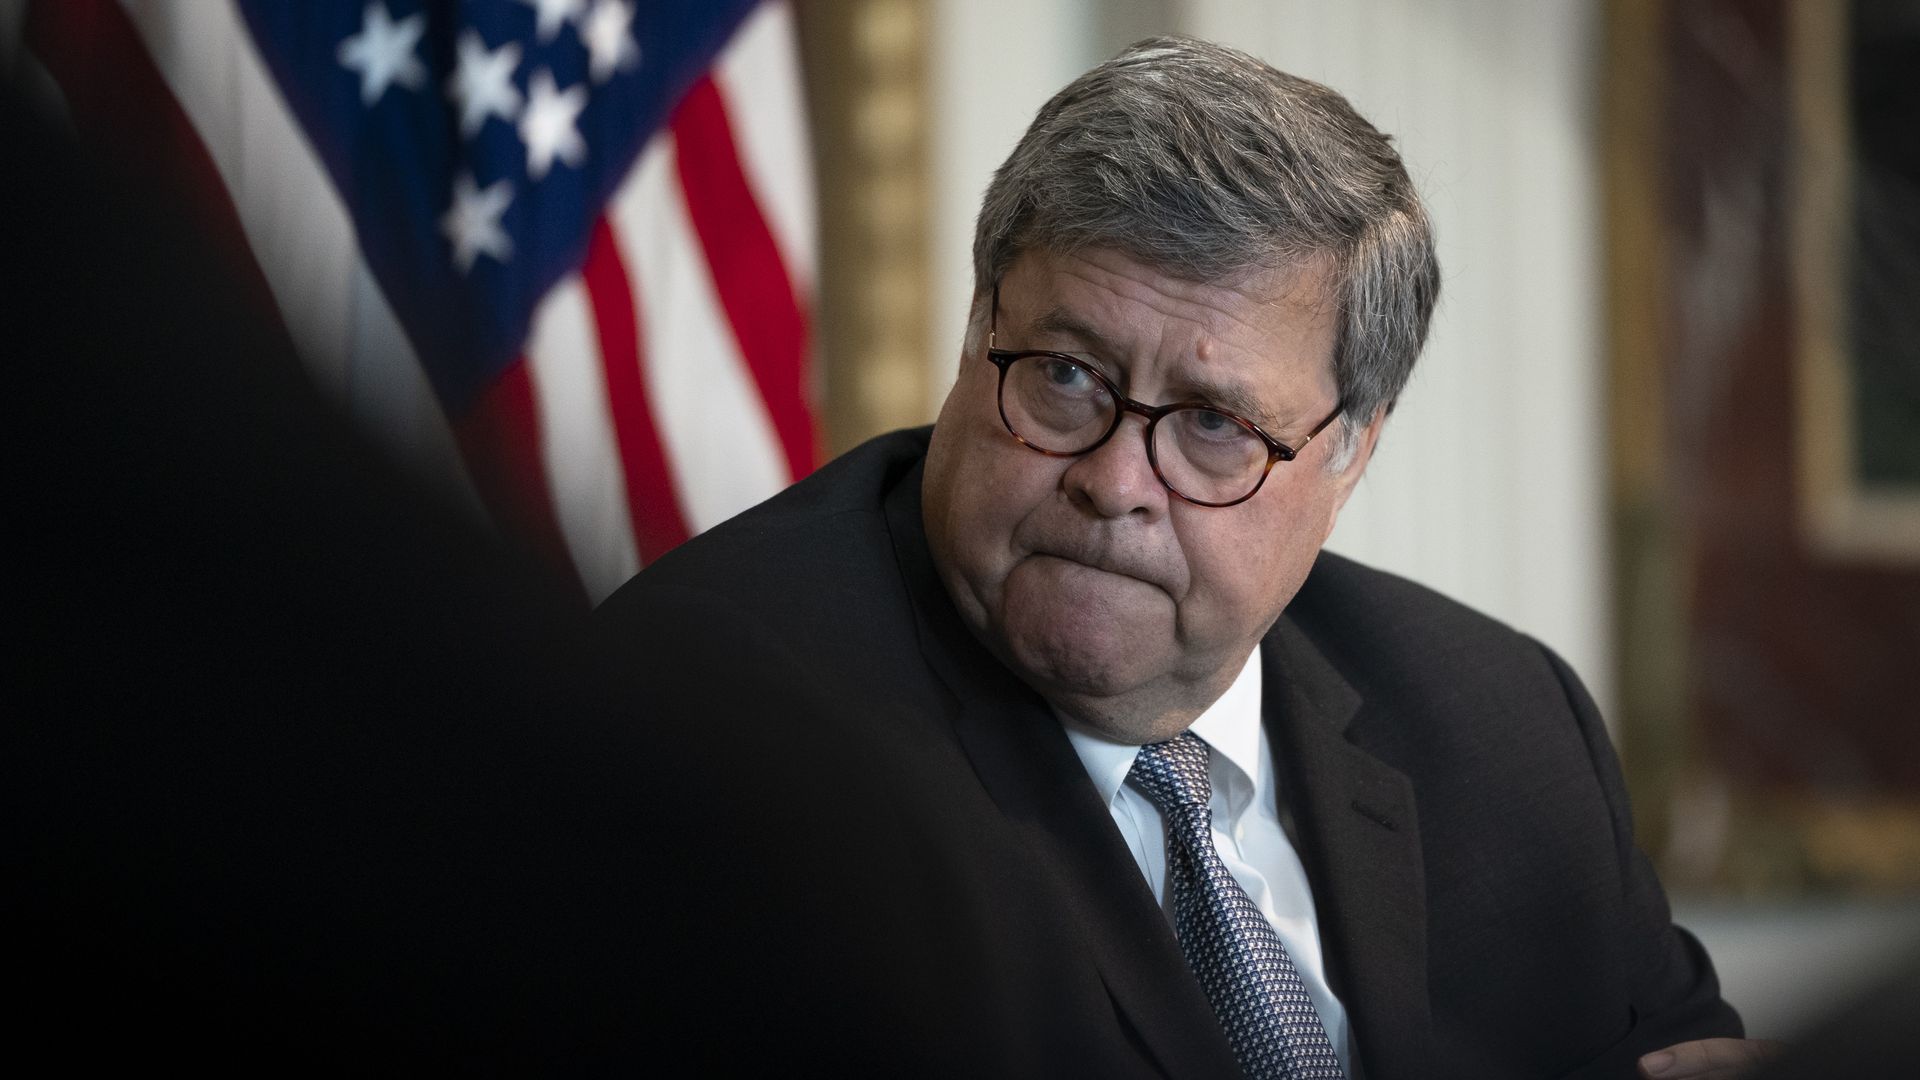 Bill Barr sits in front of an American flag